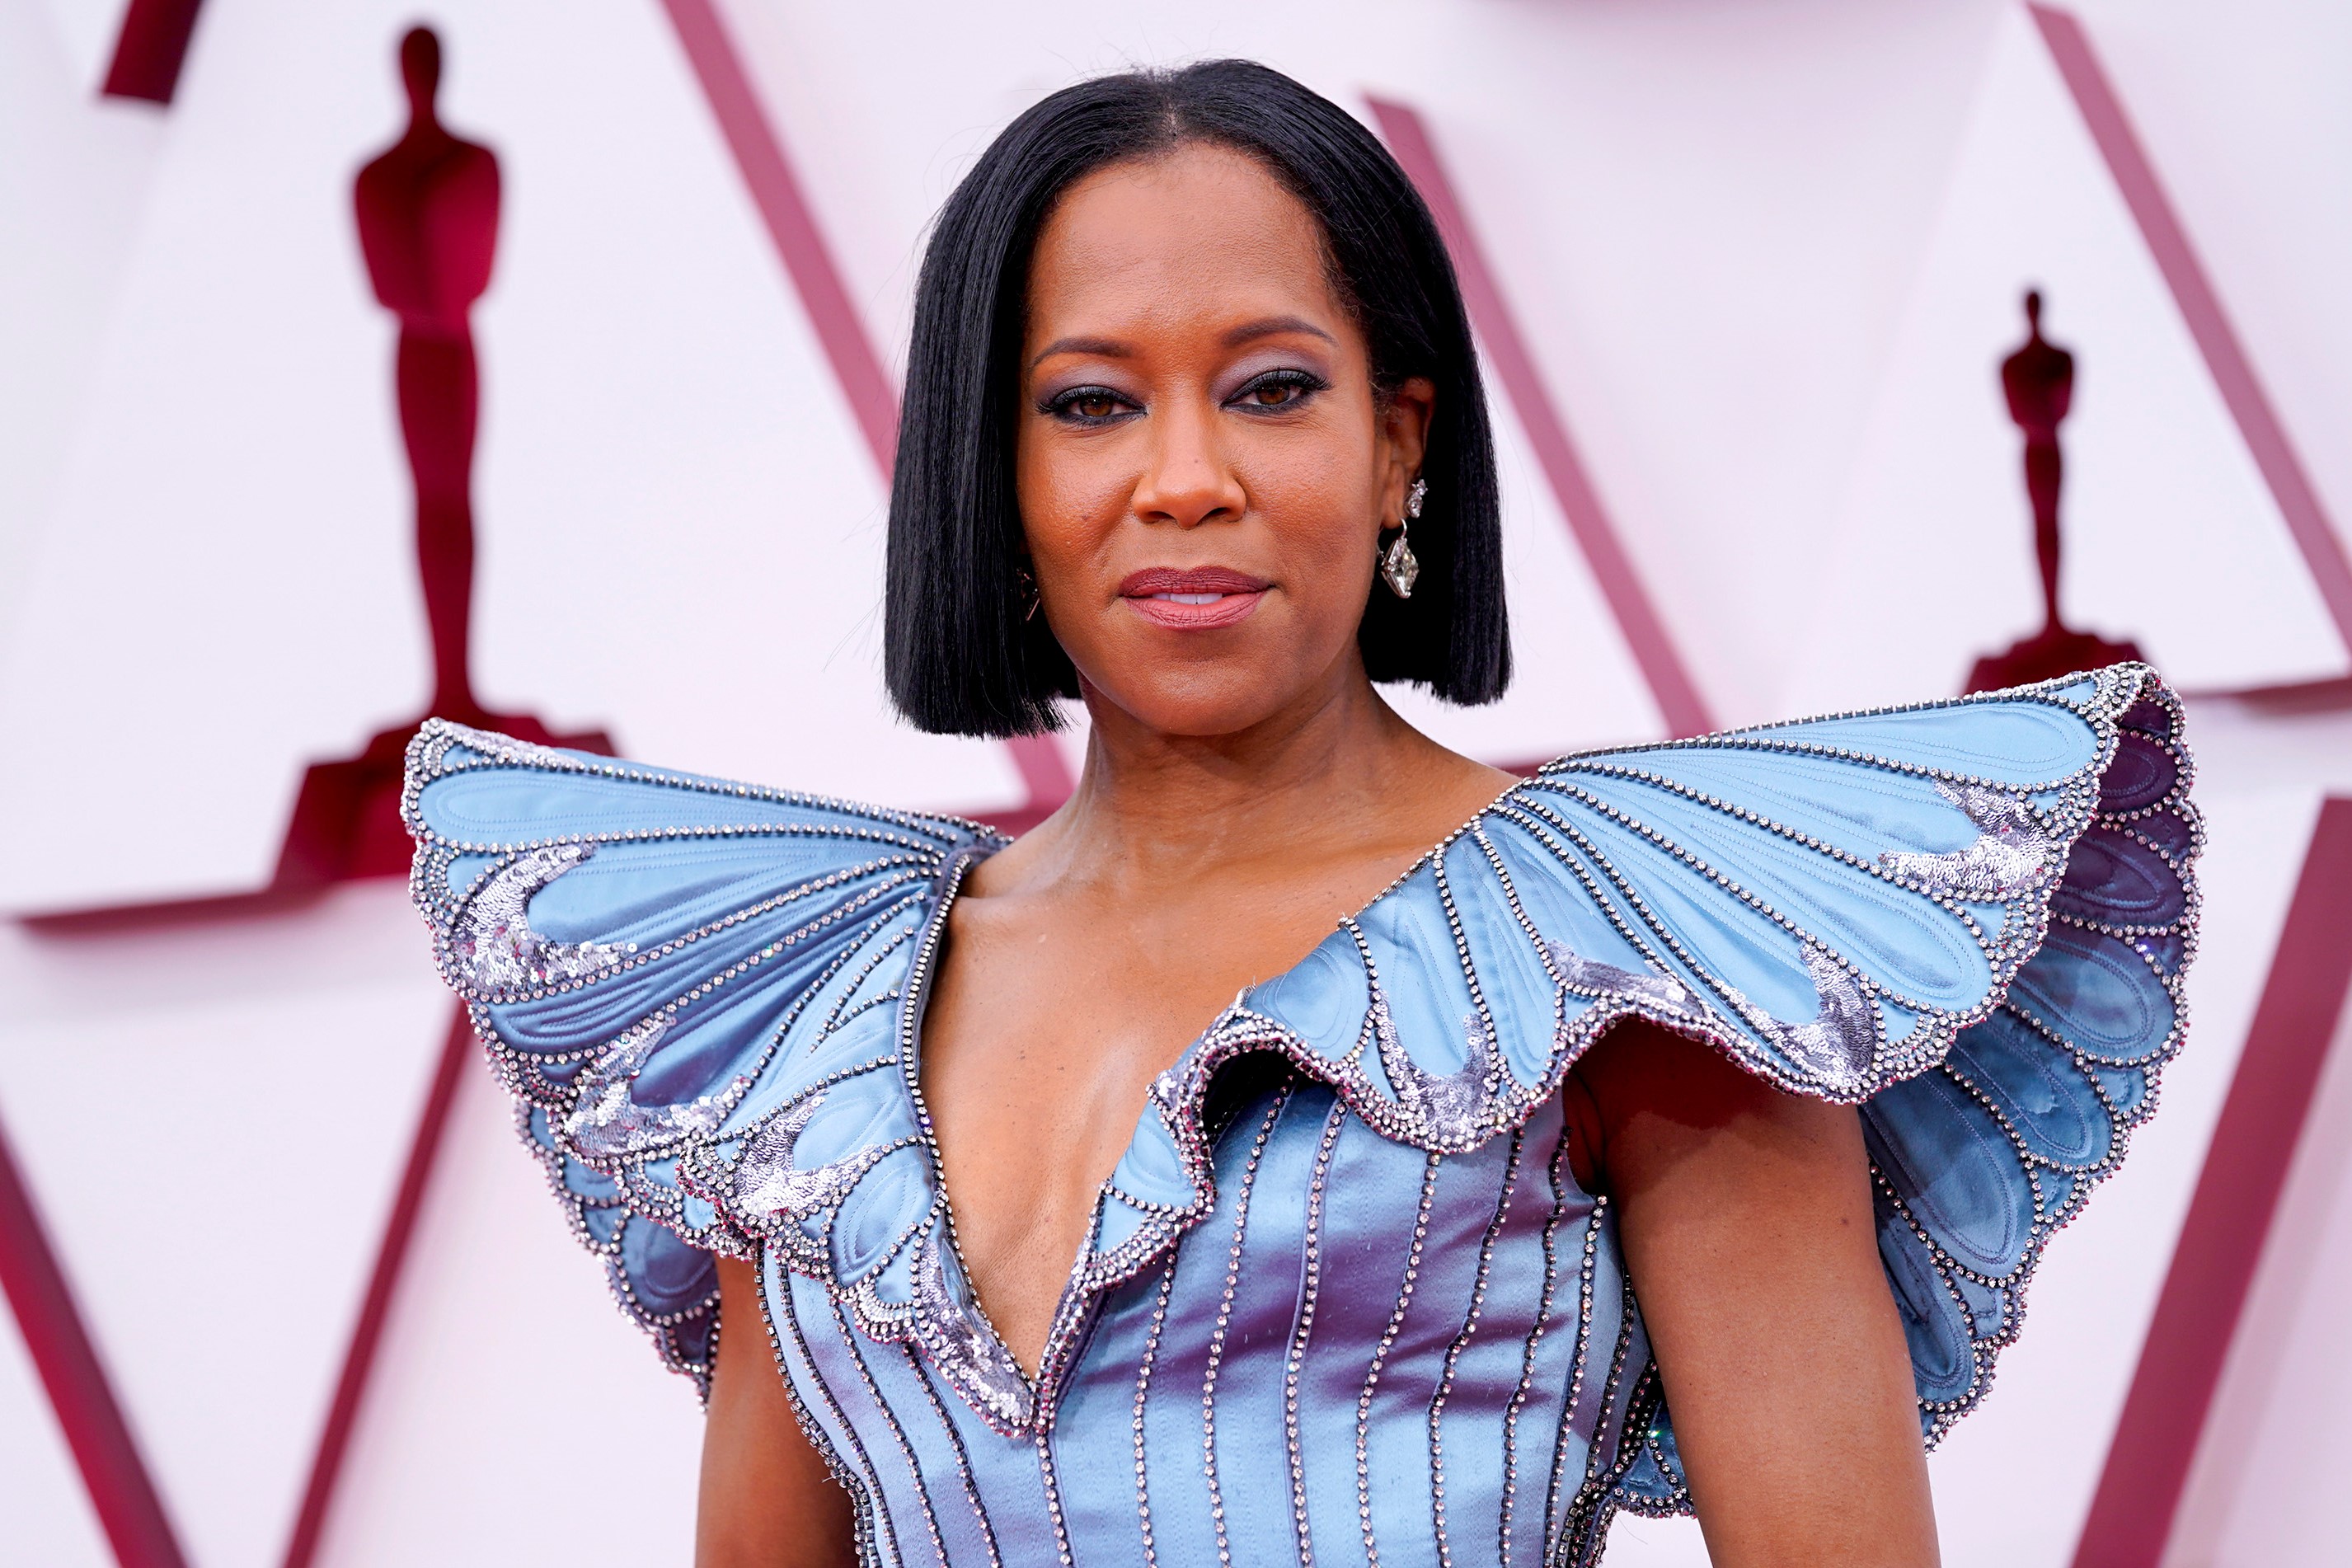 Regina King posing in a blue gown at Academy Awards in 2021.